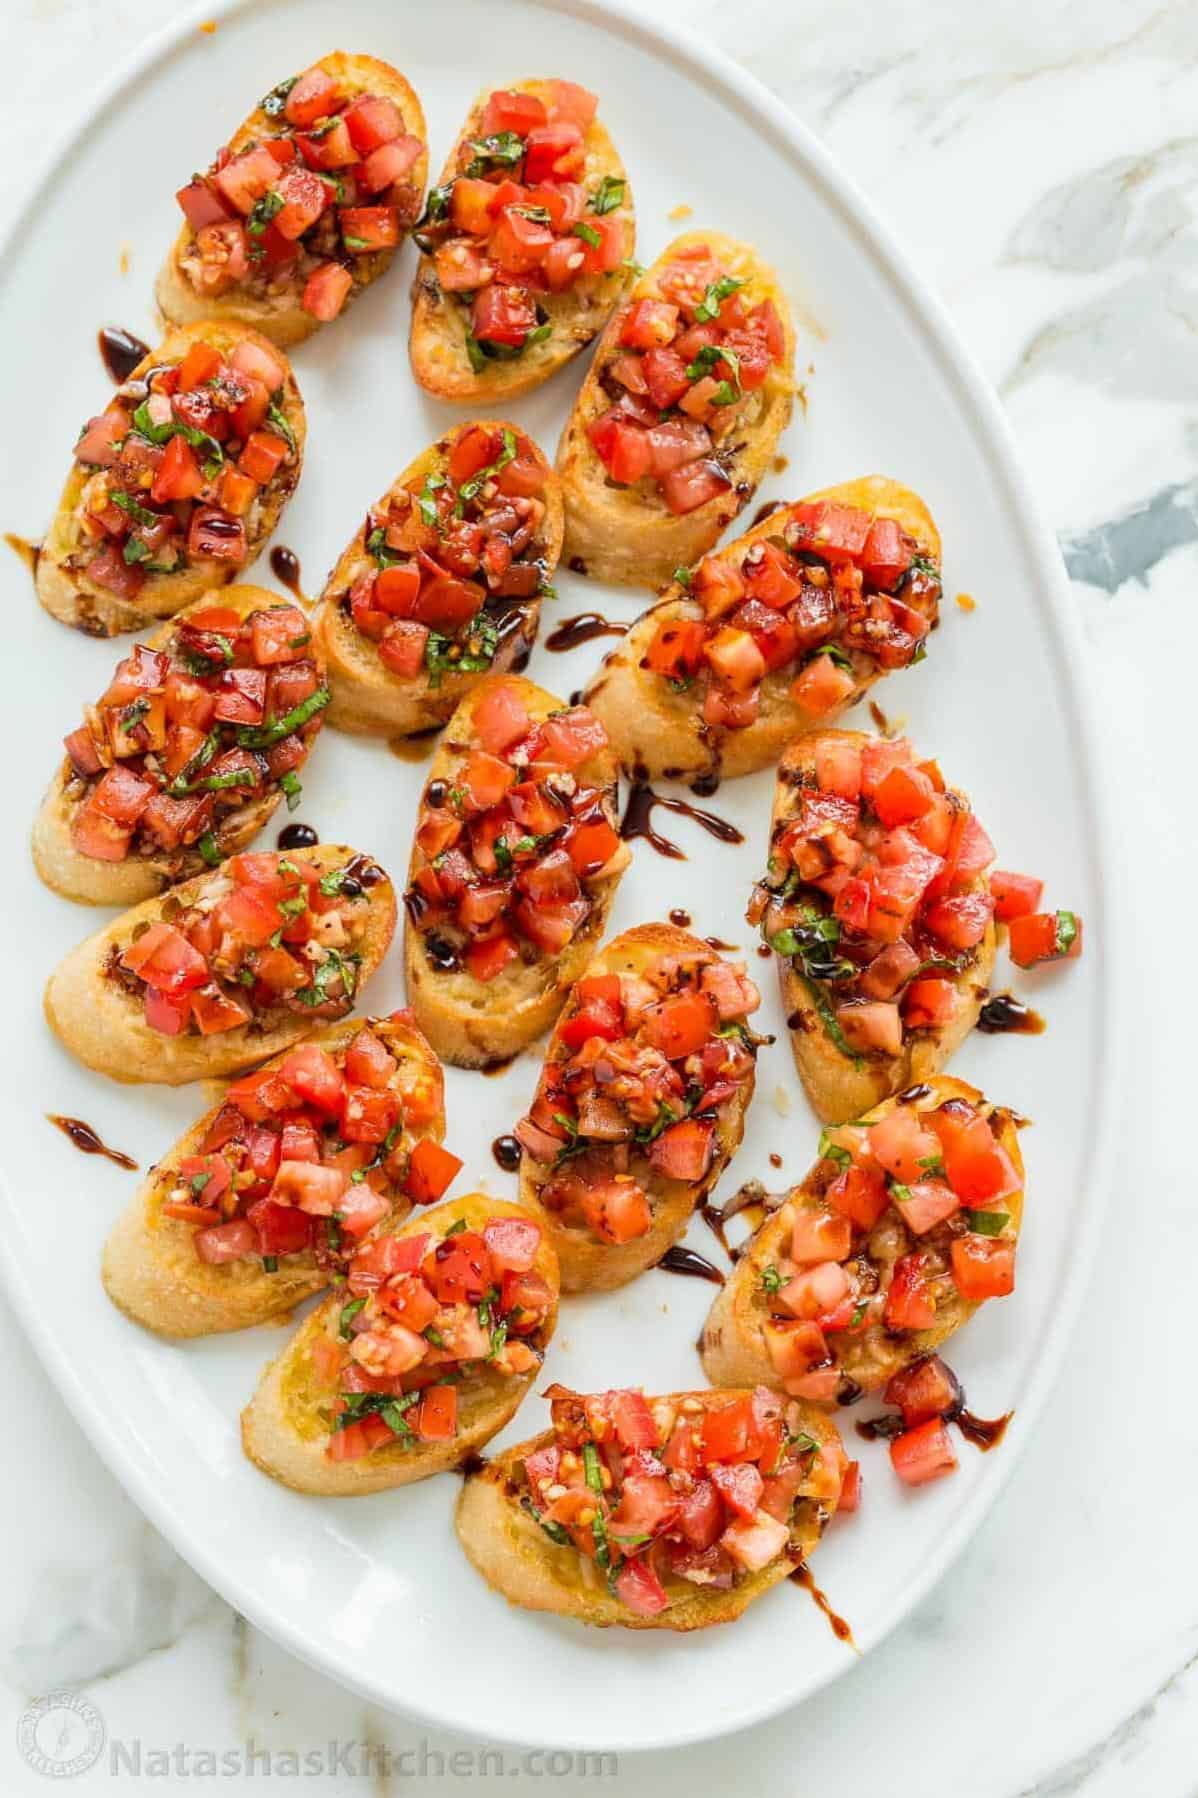  The perfect appetizer for any Italian-inspired meal.